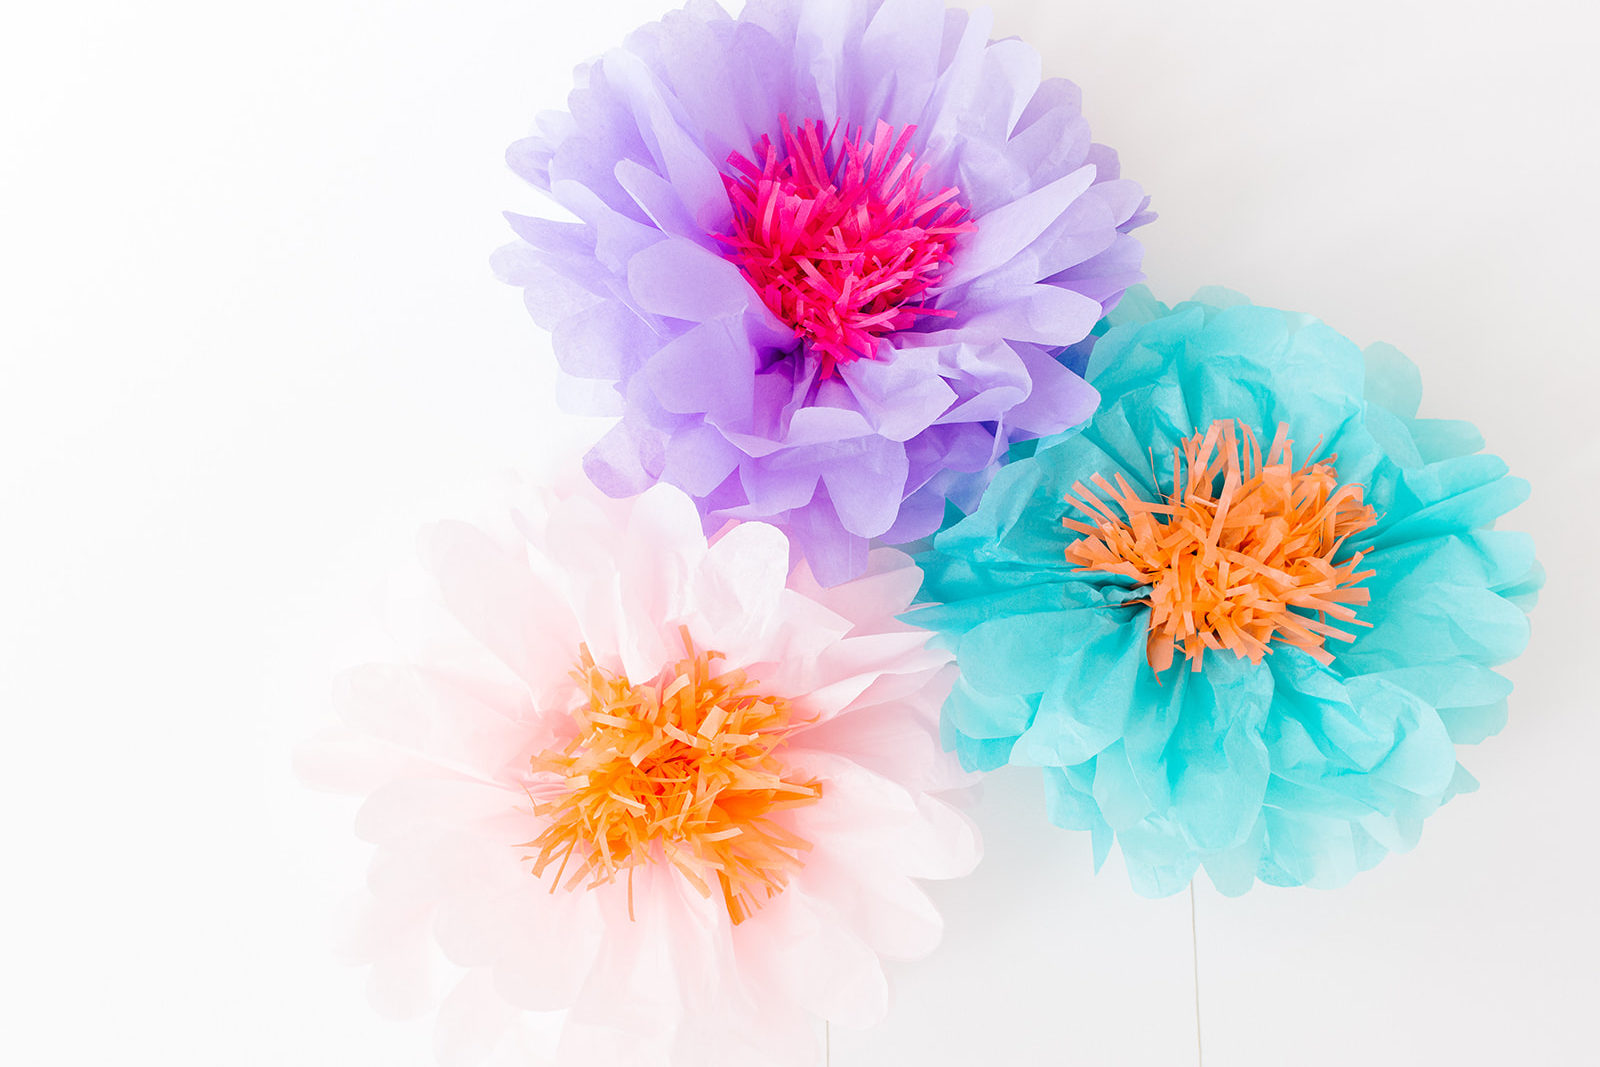 Learn How To Make Giant Paper Flowers